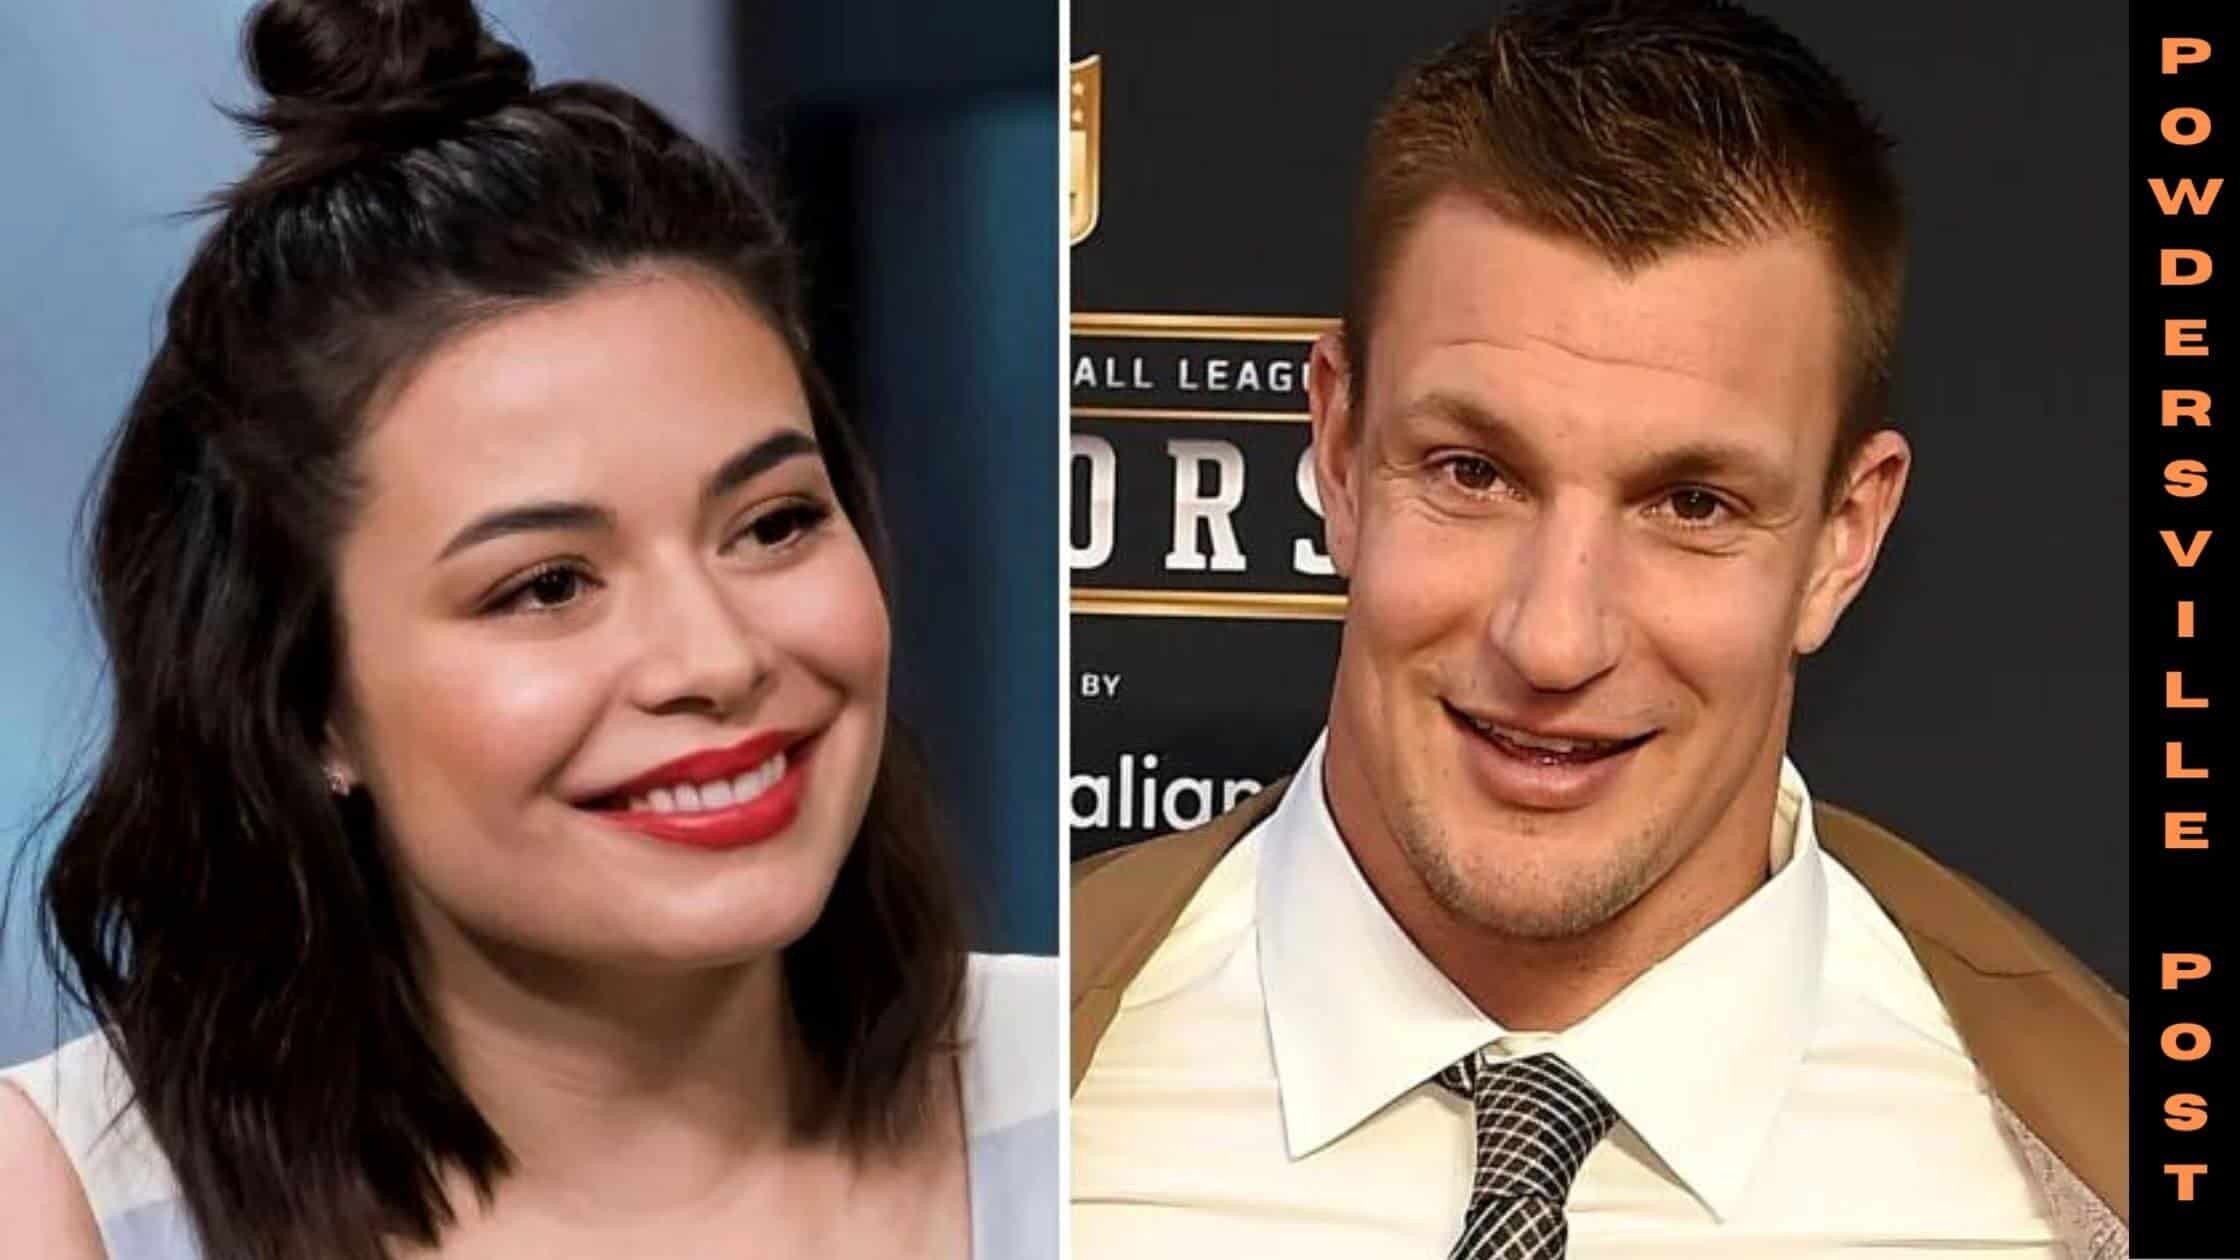 Miranda Cosgrove And Rob Gronkowski Announce They're Hosting The 2022 Nickelodeon Kids' Choice Awards